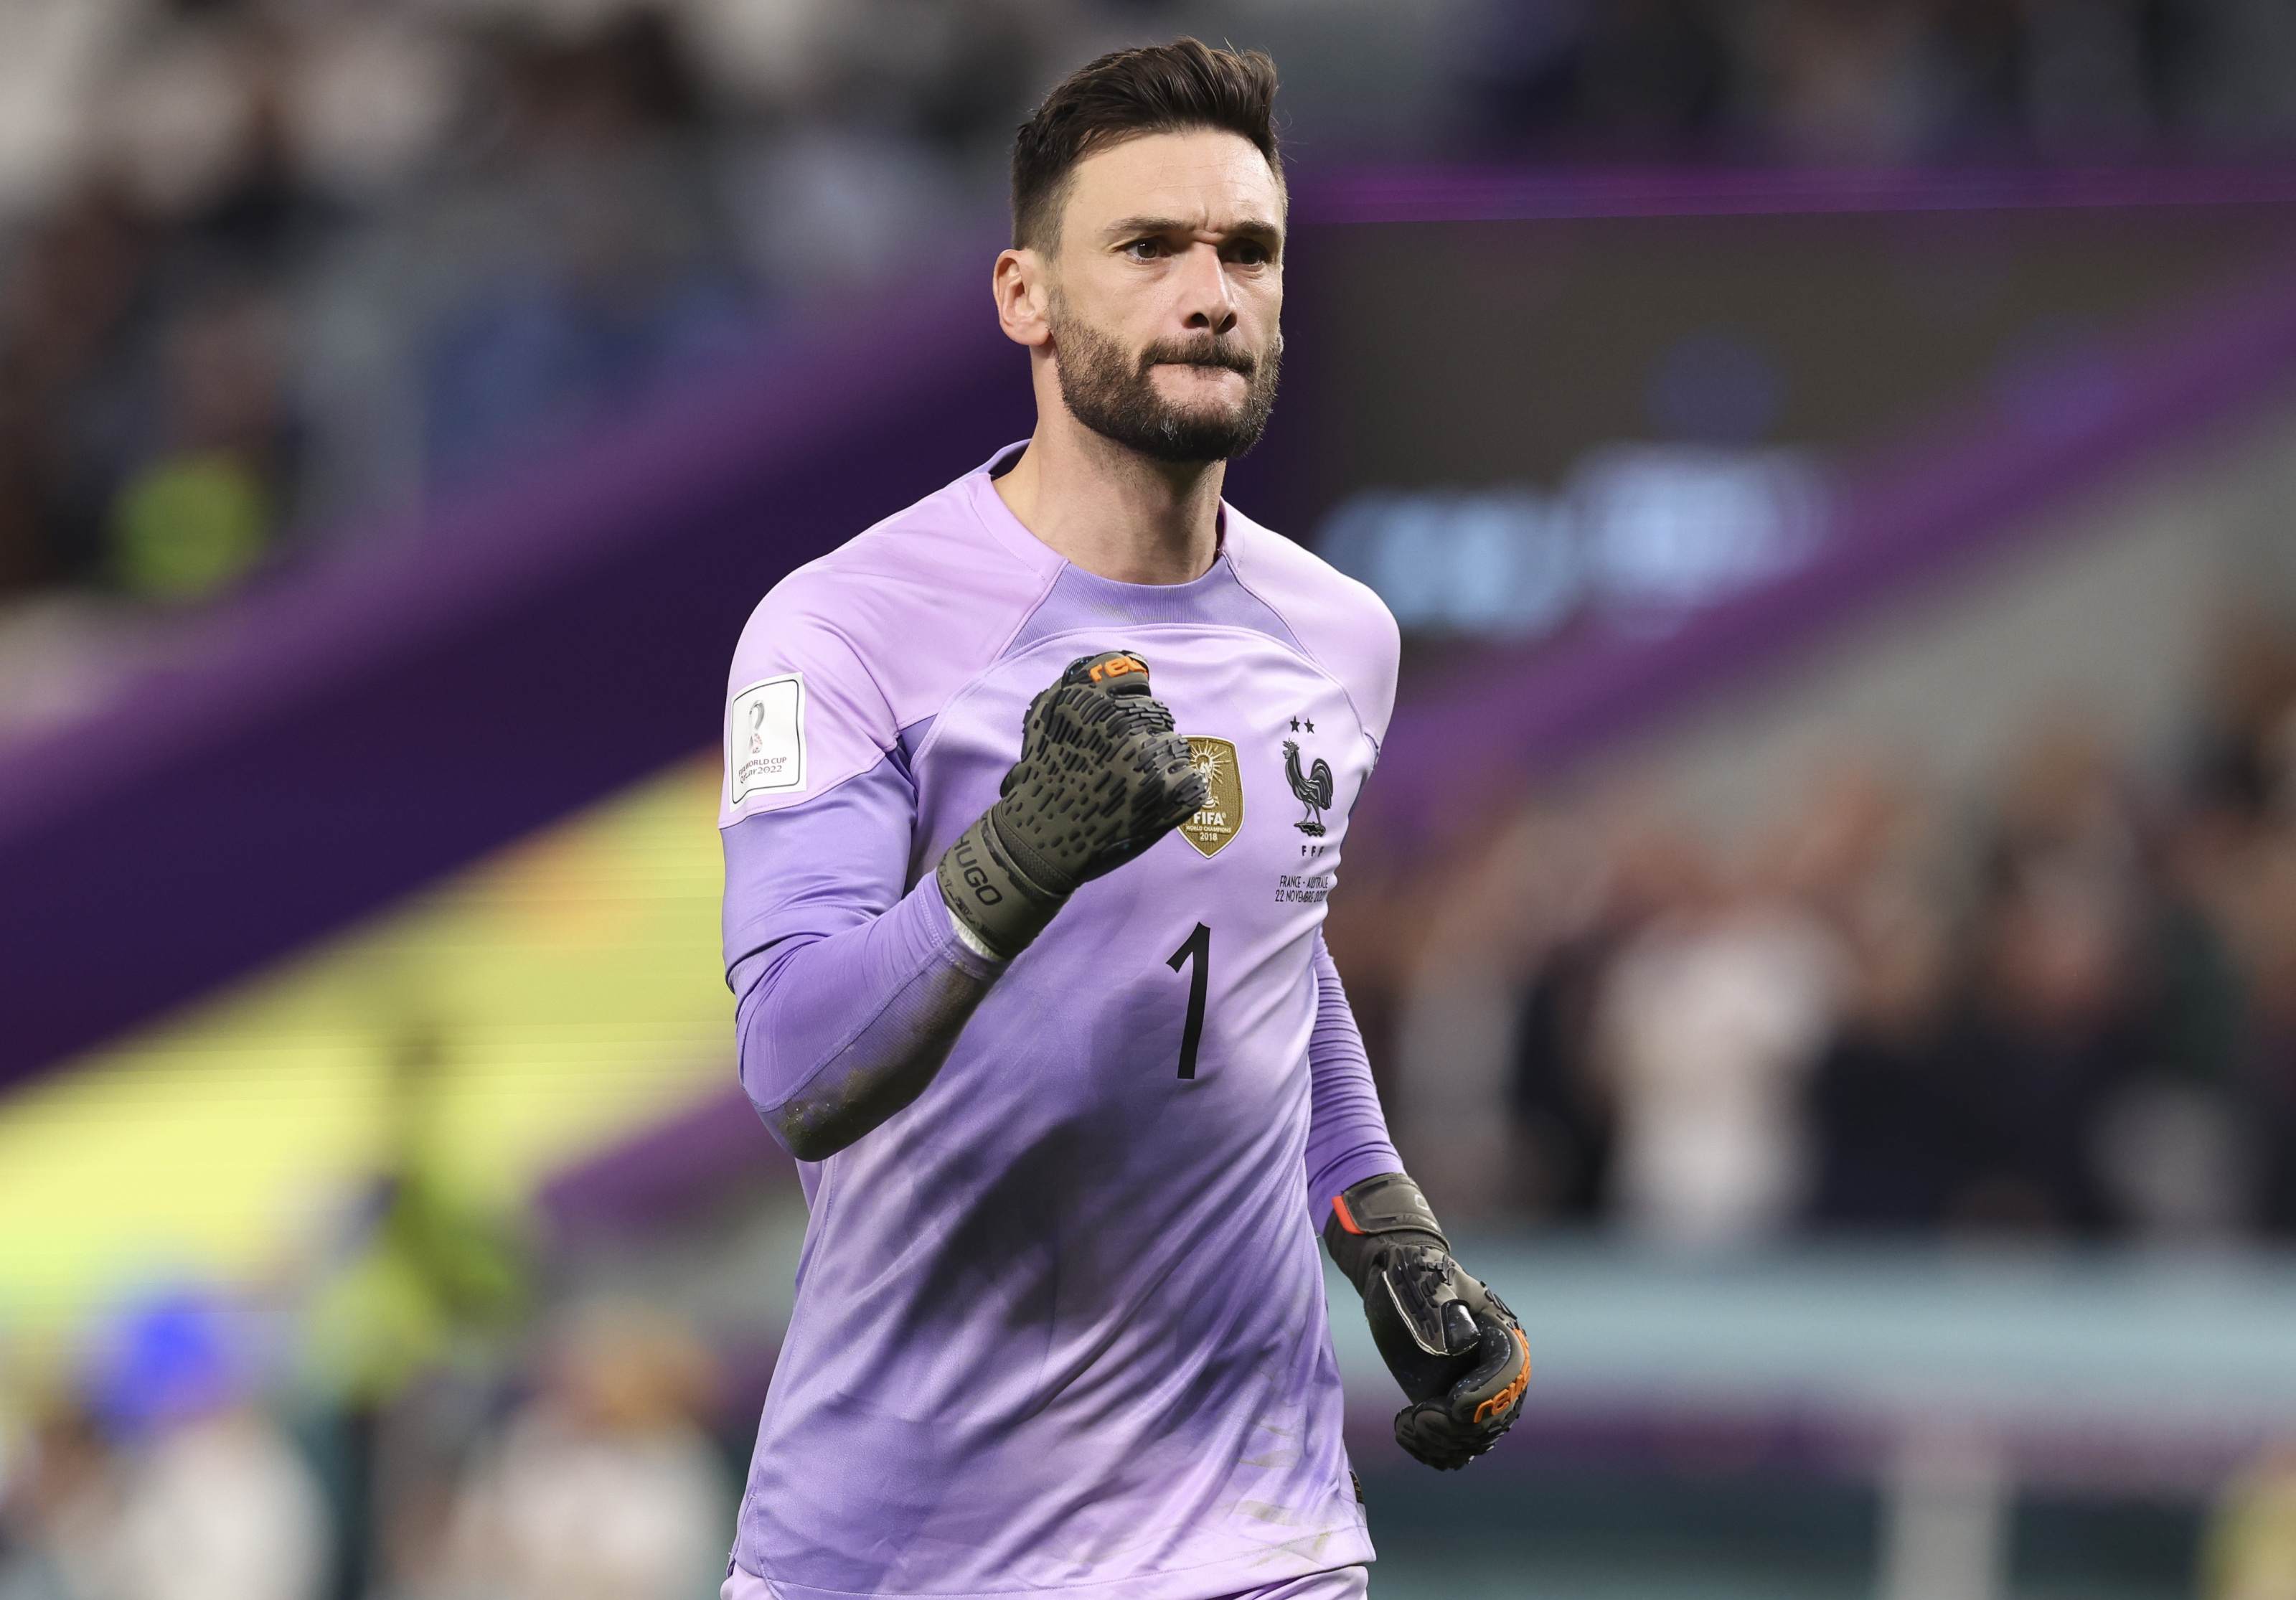 World Cup: Hugo Lloris Pulled Off 1 of the Saves of the Tournament